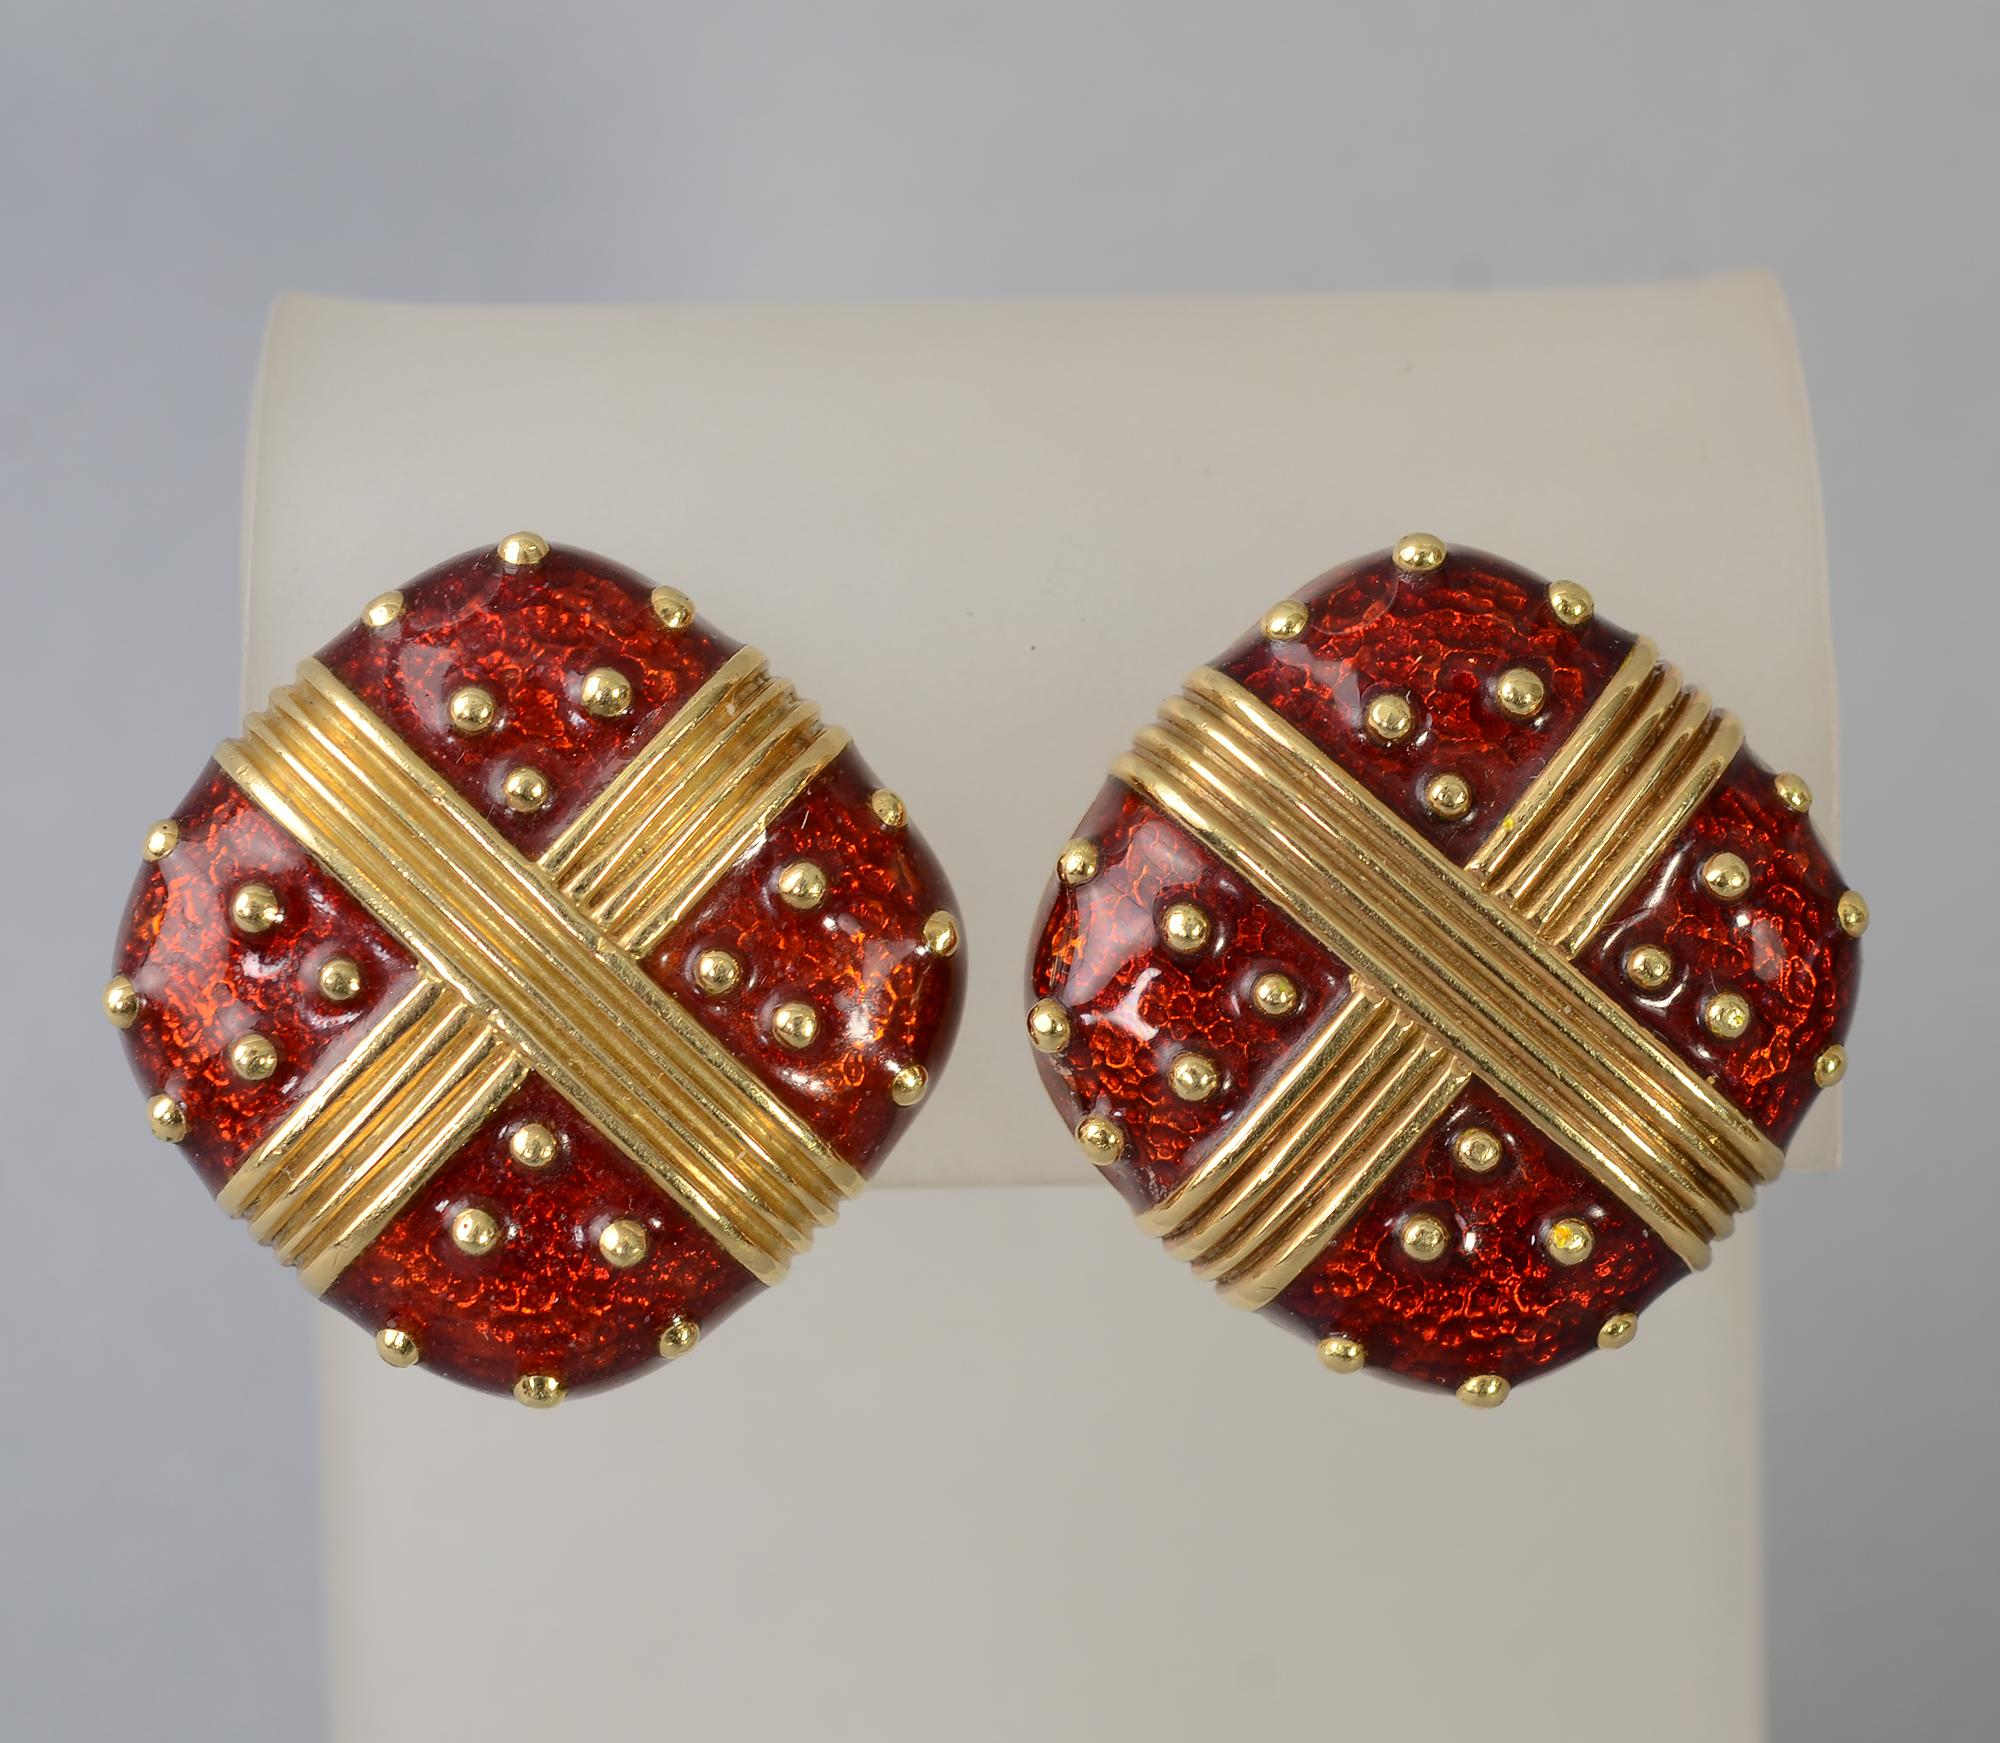 Stylish 18 karat gold and red enamel earrings. The gold criss cross is filled with six gold dots in each quadrant. One back has a clip and post. The post is missing from one of the earrings. It can easily be replaced or the existing one removed for